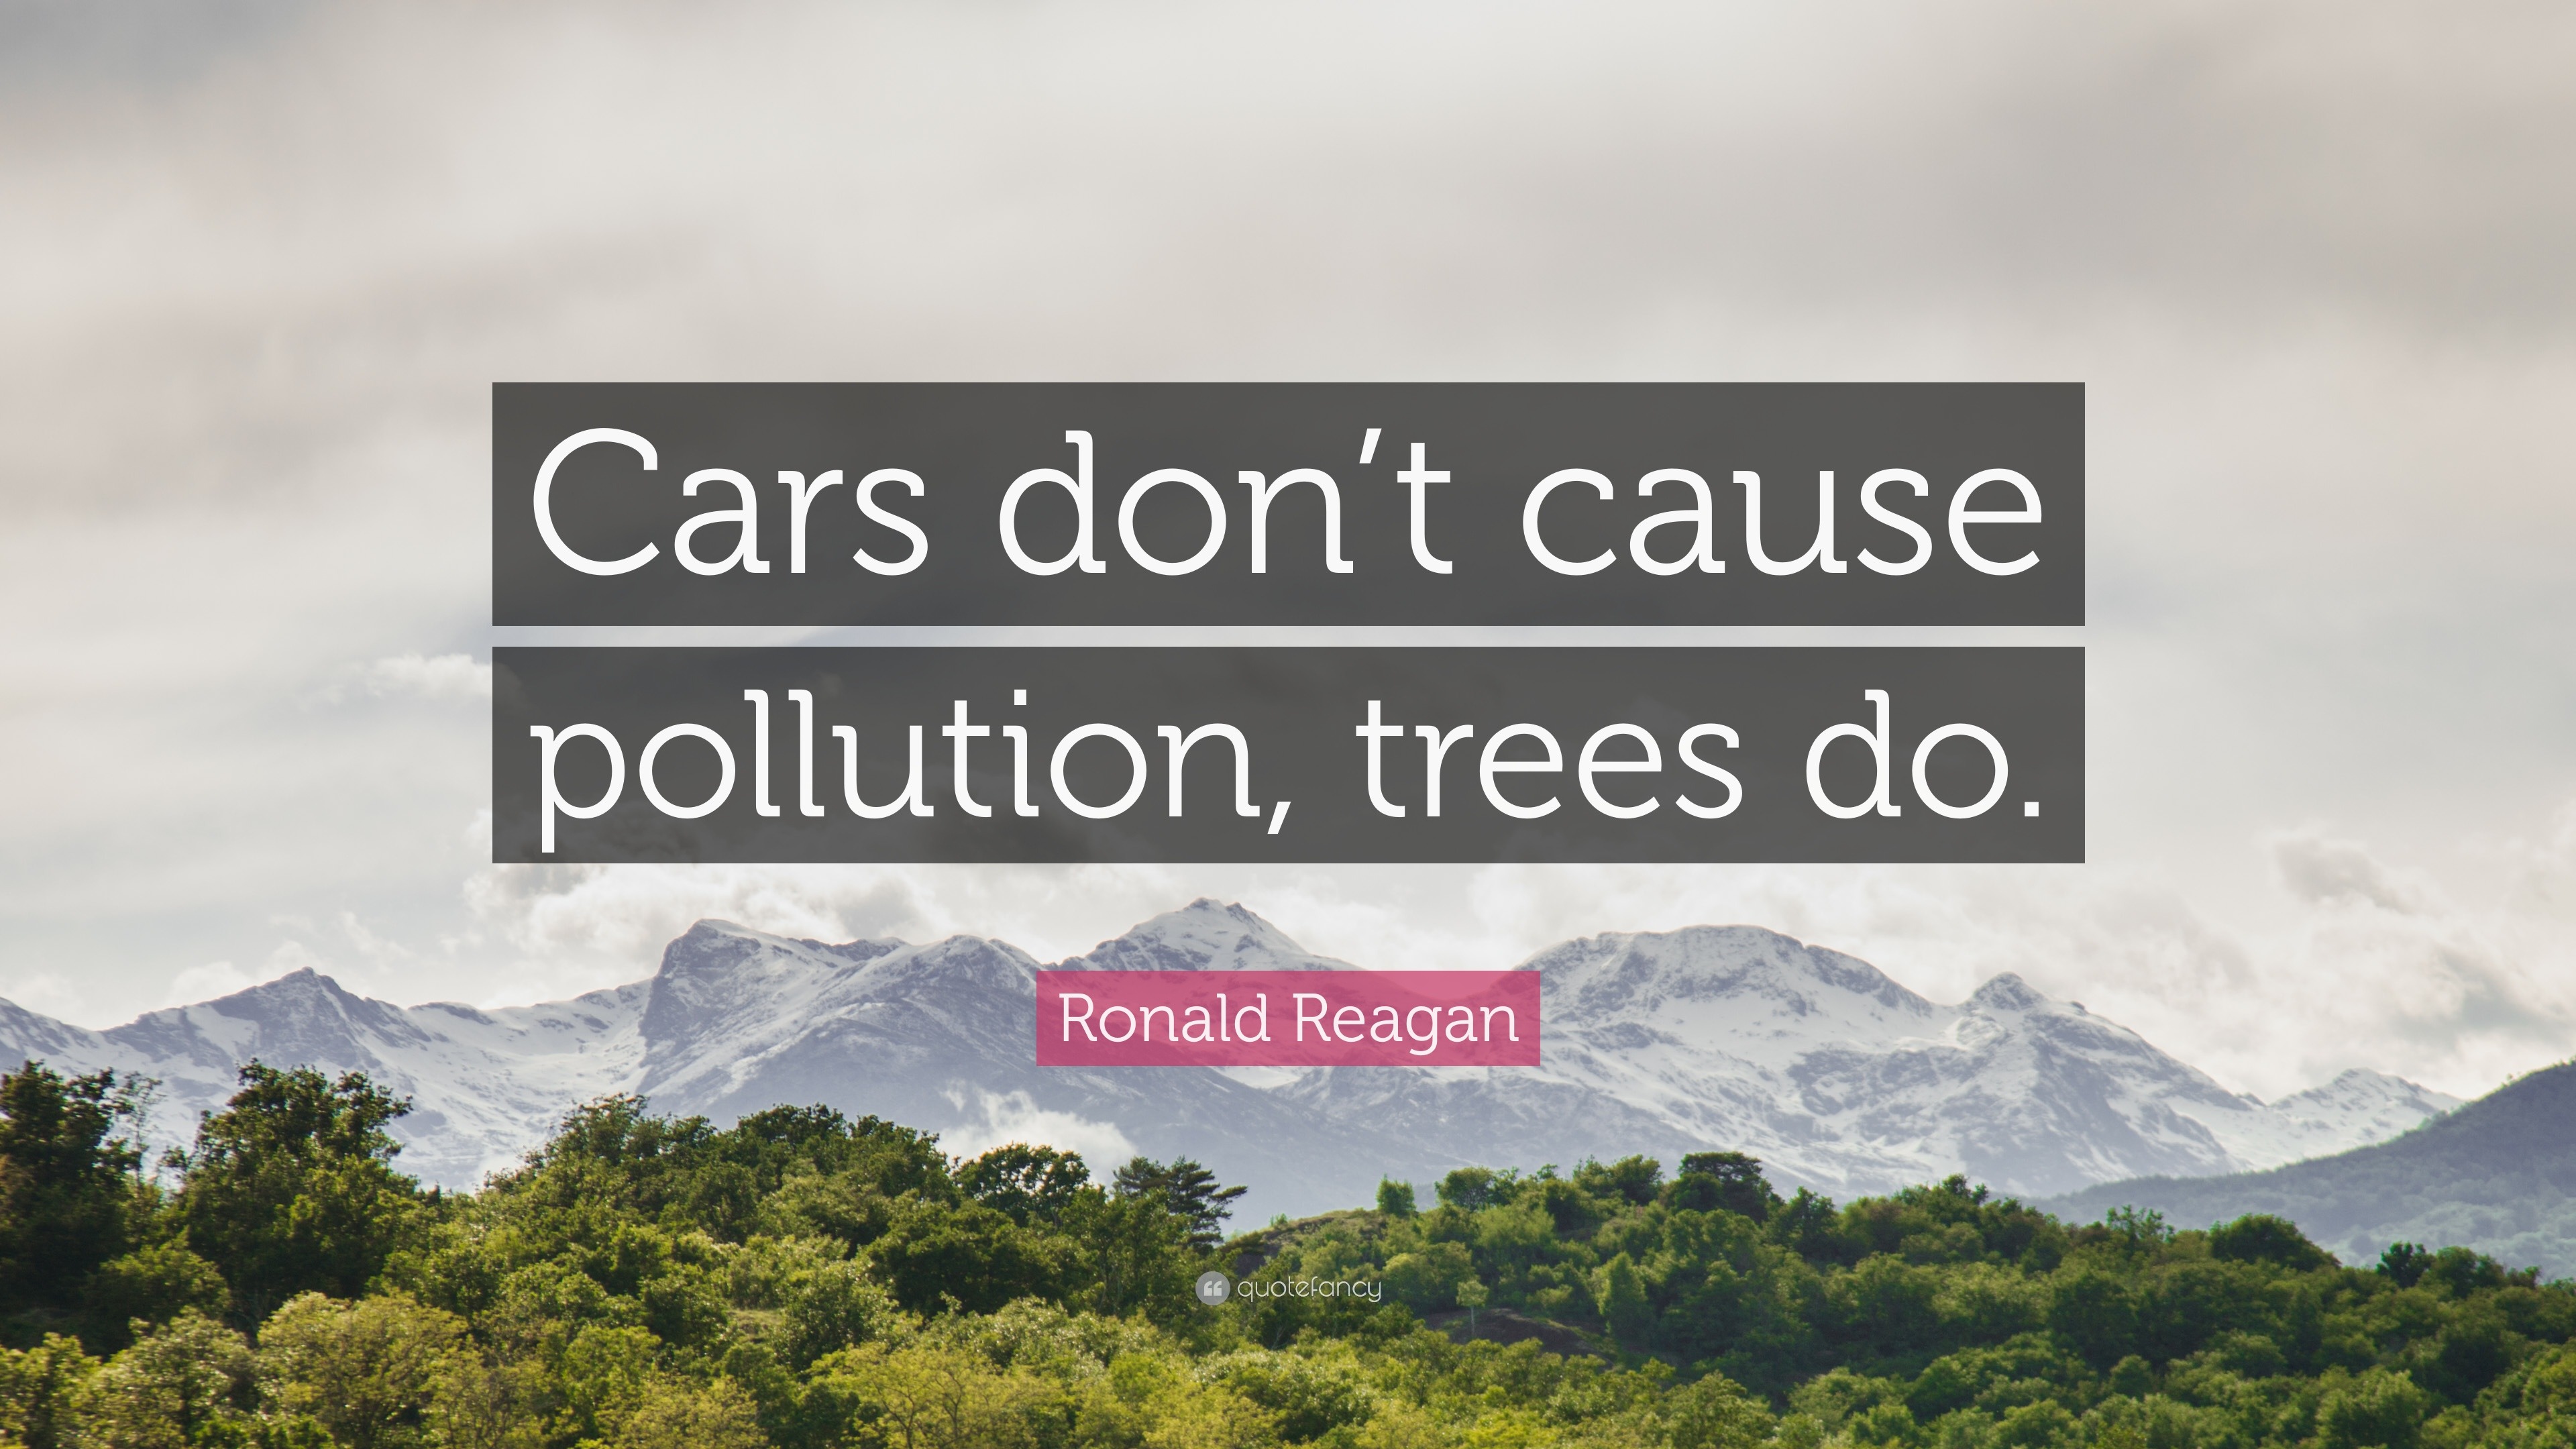 70232-Ronald-Reagan-Quote-Cars-don-t-cause-pollution-trees-do.jpg